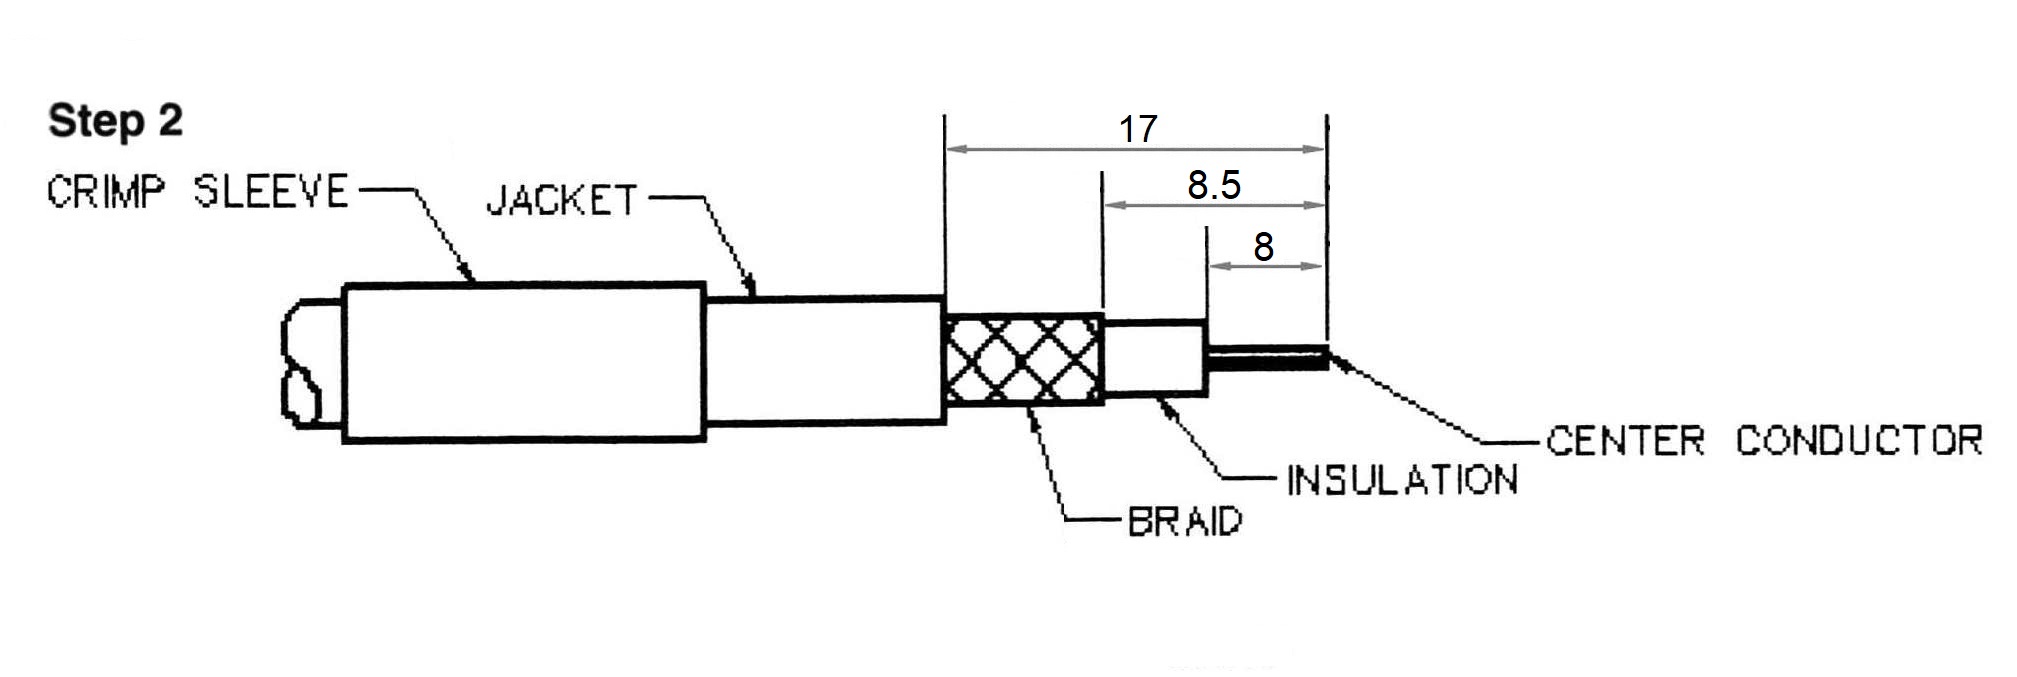 BNC female Crimp On for RG-223, RG-59, LMR-240, RG-8X mini 8, and other 0.240 Inch OD Coax 7006-BNC-8X Installation Guide step 2 - Max-Gain Systems Inc